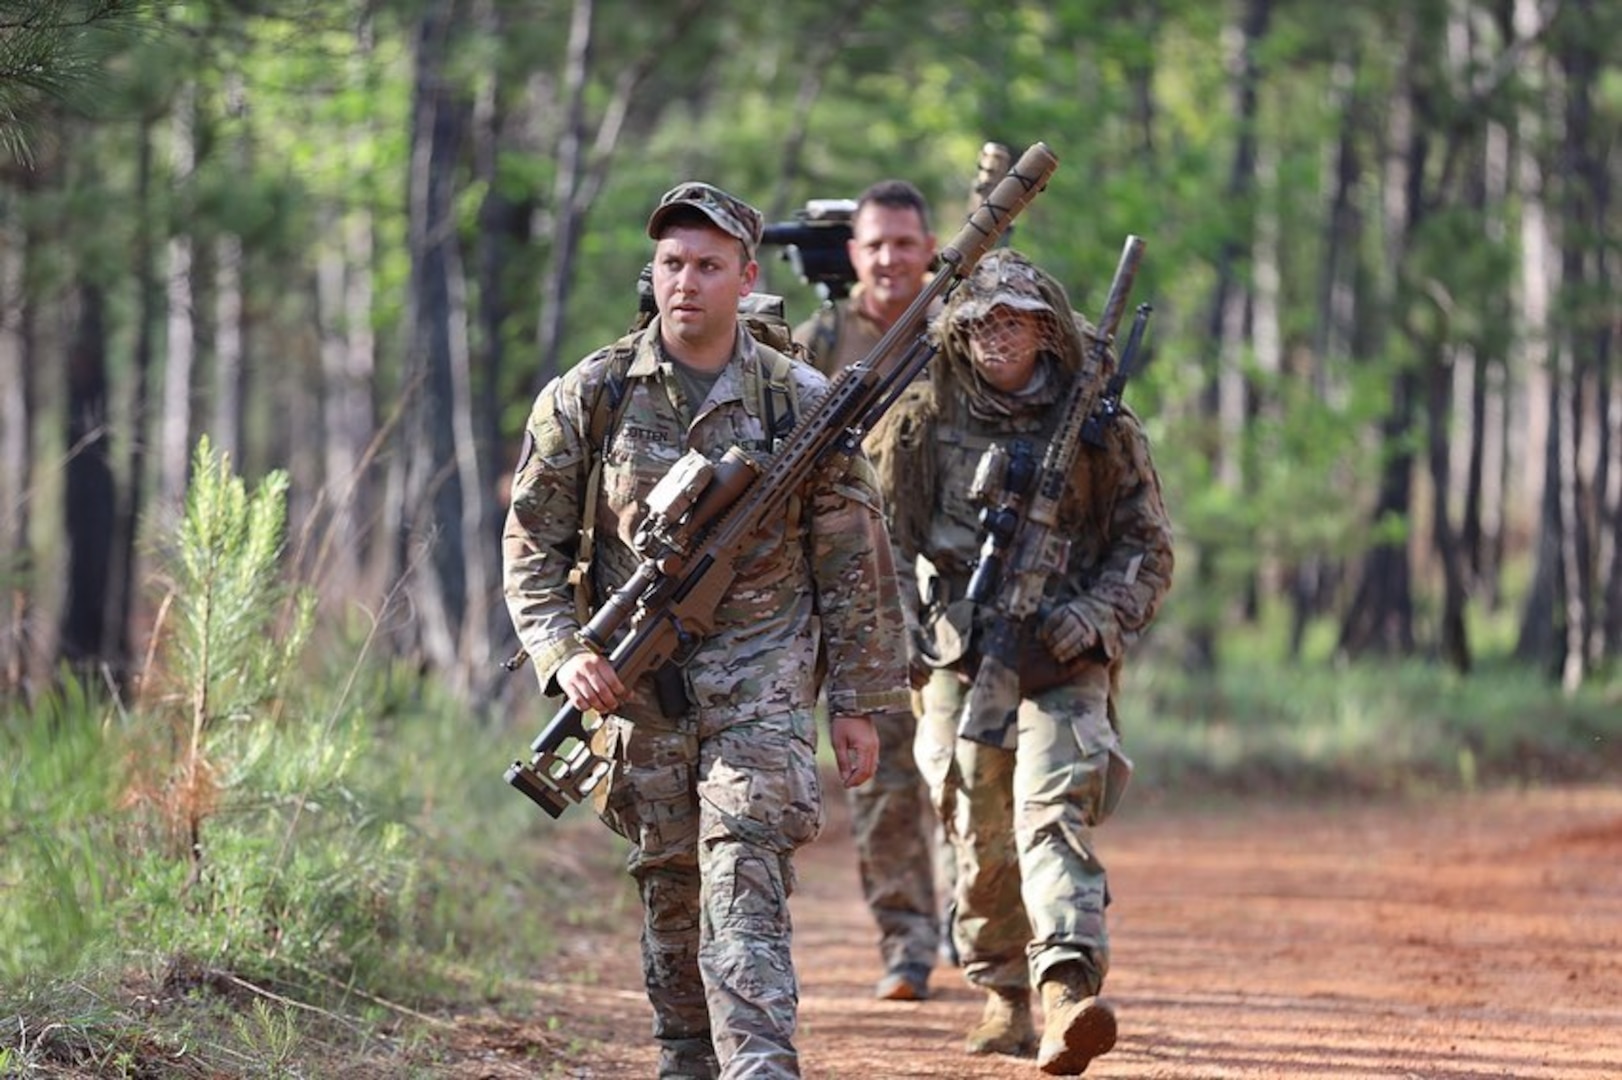 Team Leader Sgt. 1st Class Erik Vargas of the New Mexico National Guard, and teammates Staff Sgt. Benjamin Cotten and Staff Sgt. Allen Smith of the Arkansas National Guard during the International Sniper Competition at Fort Benning, Ga., April 8-13, 2023. The team placed first.